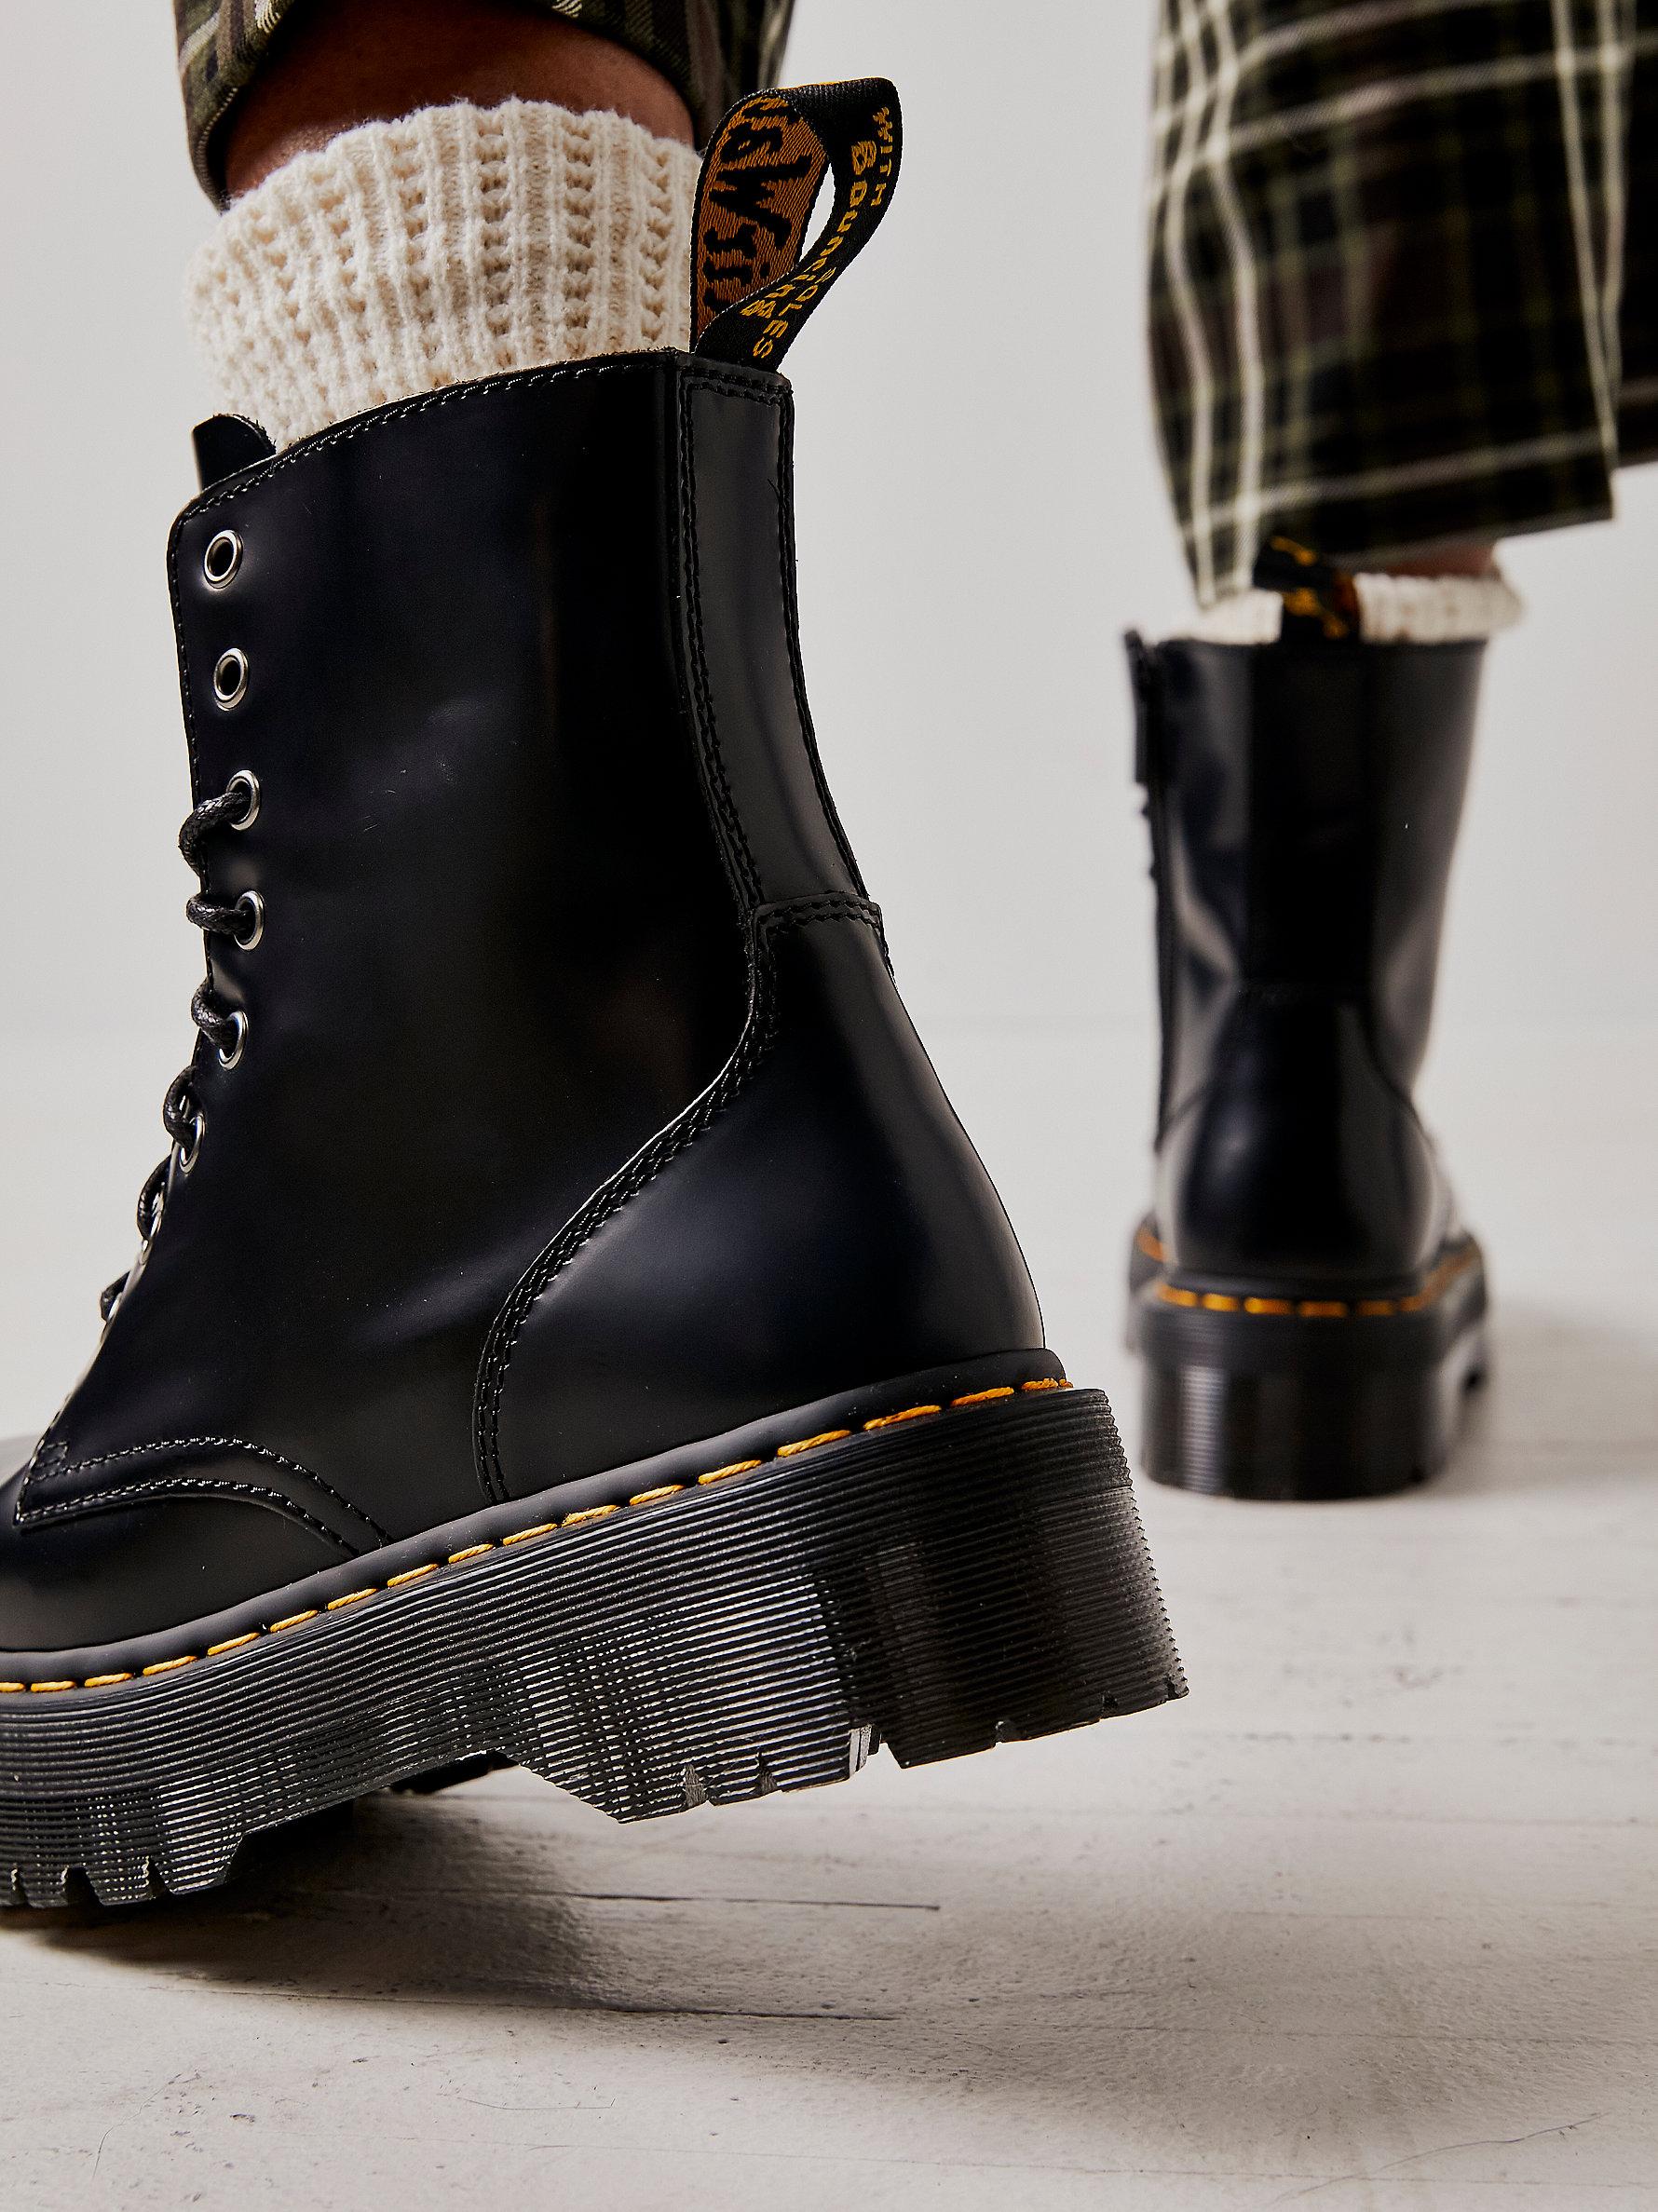 Free People Dr. Martens Jadon Lace-up Boots in Black | Lyst